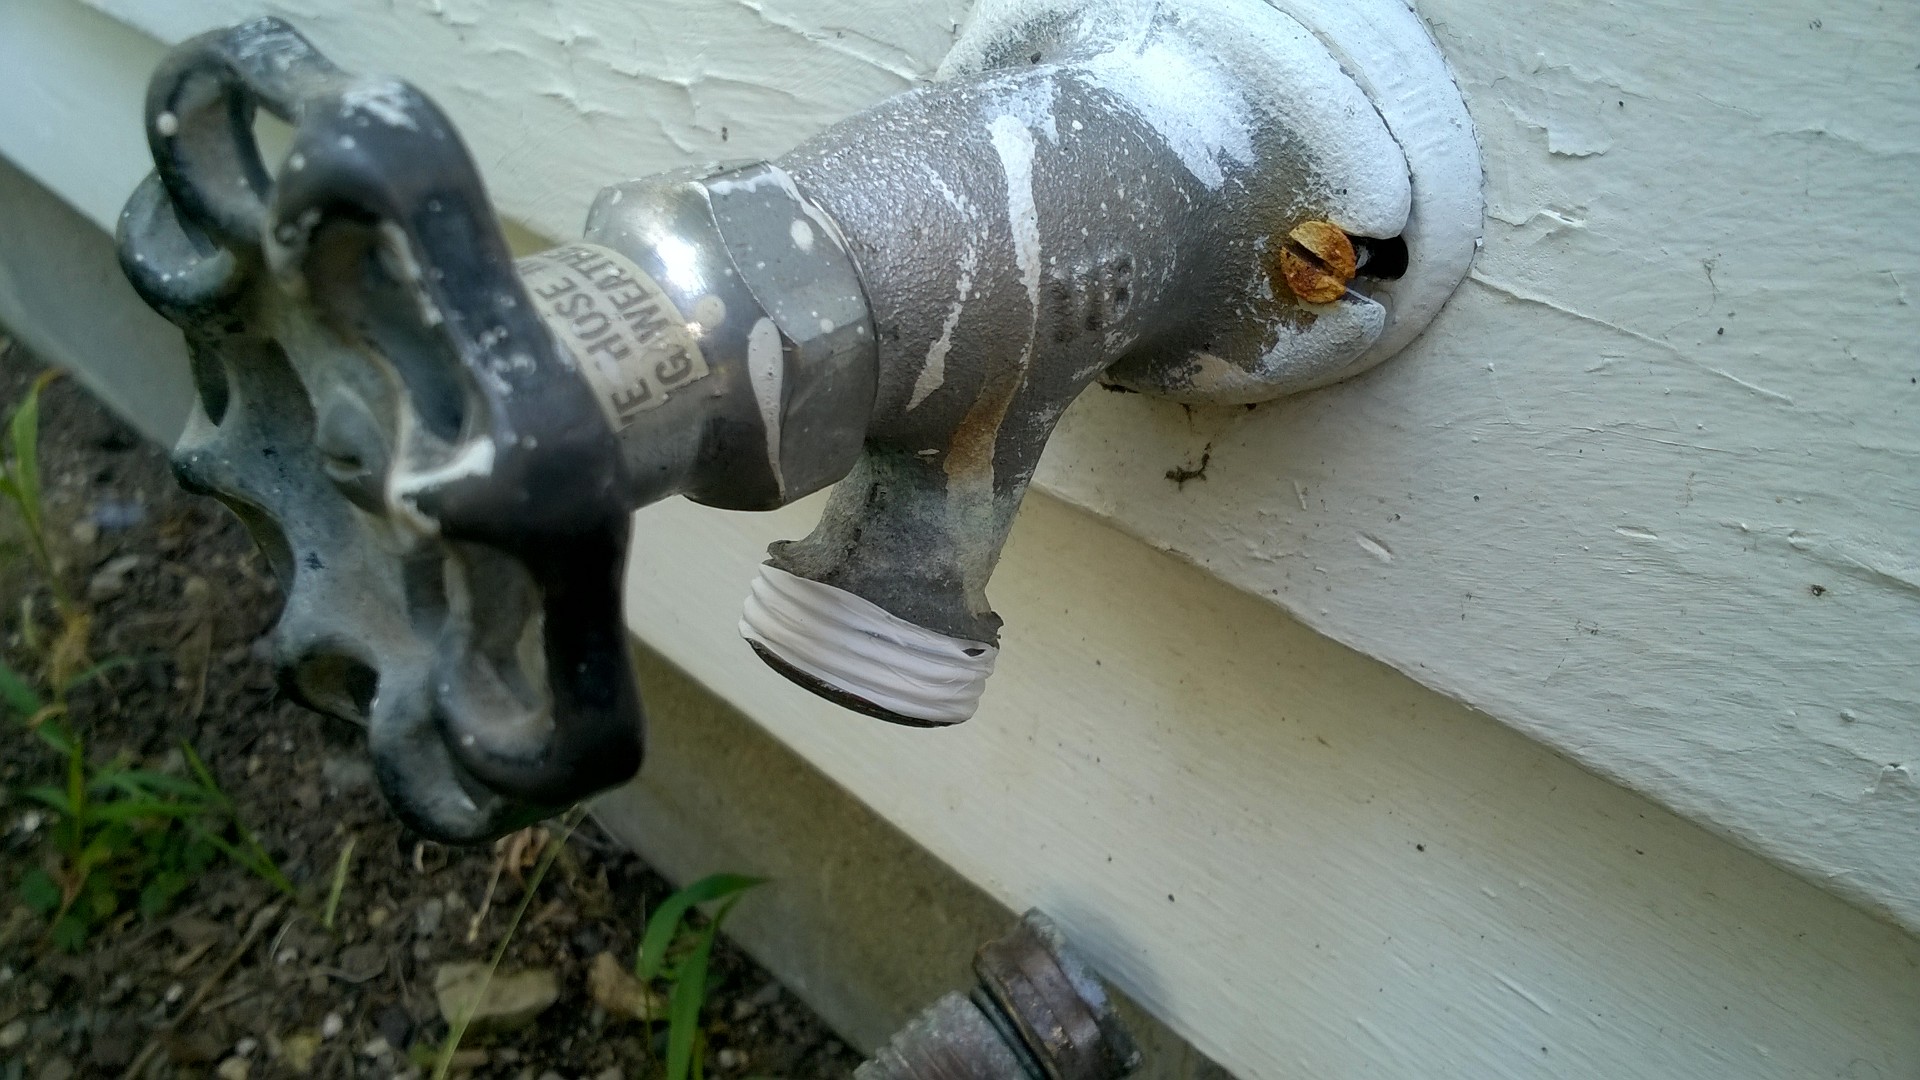 How to fix leaky hose faucet